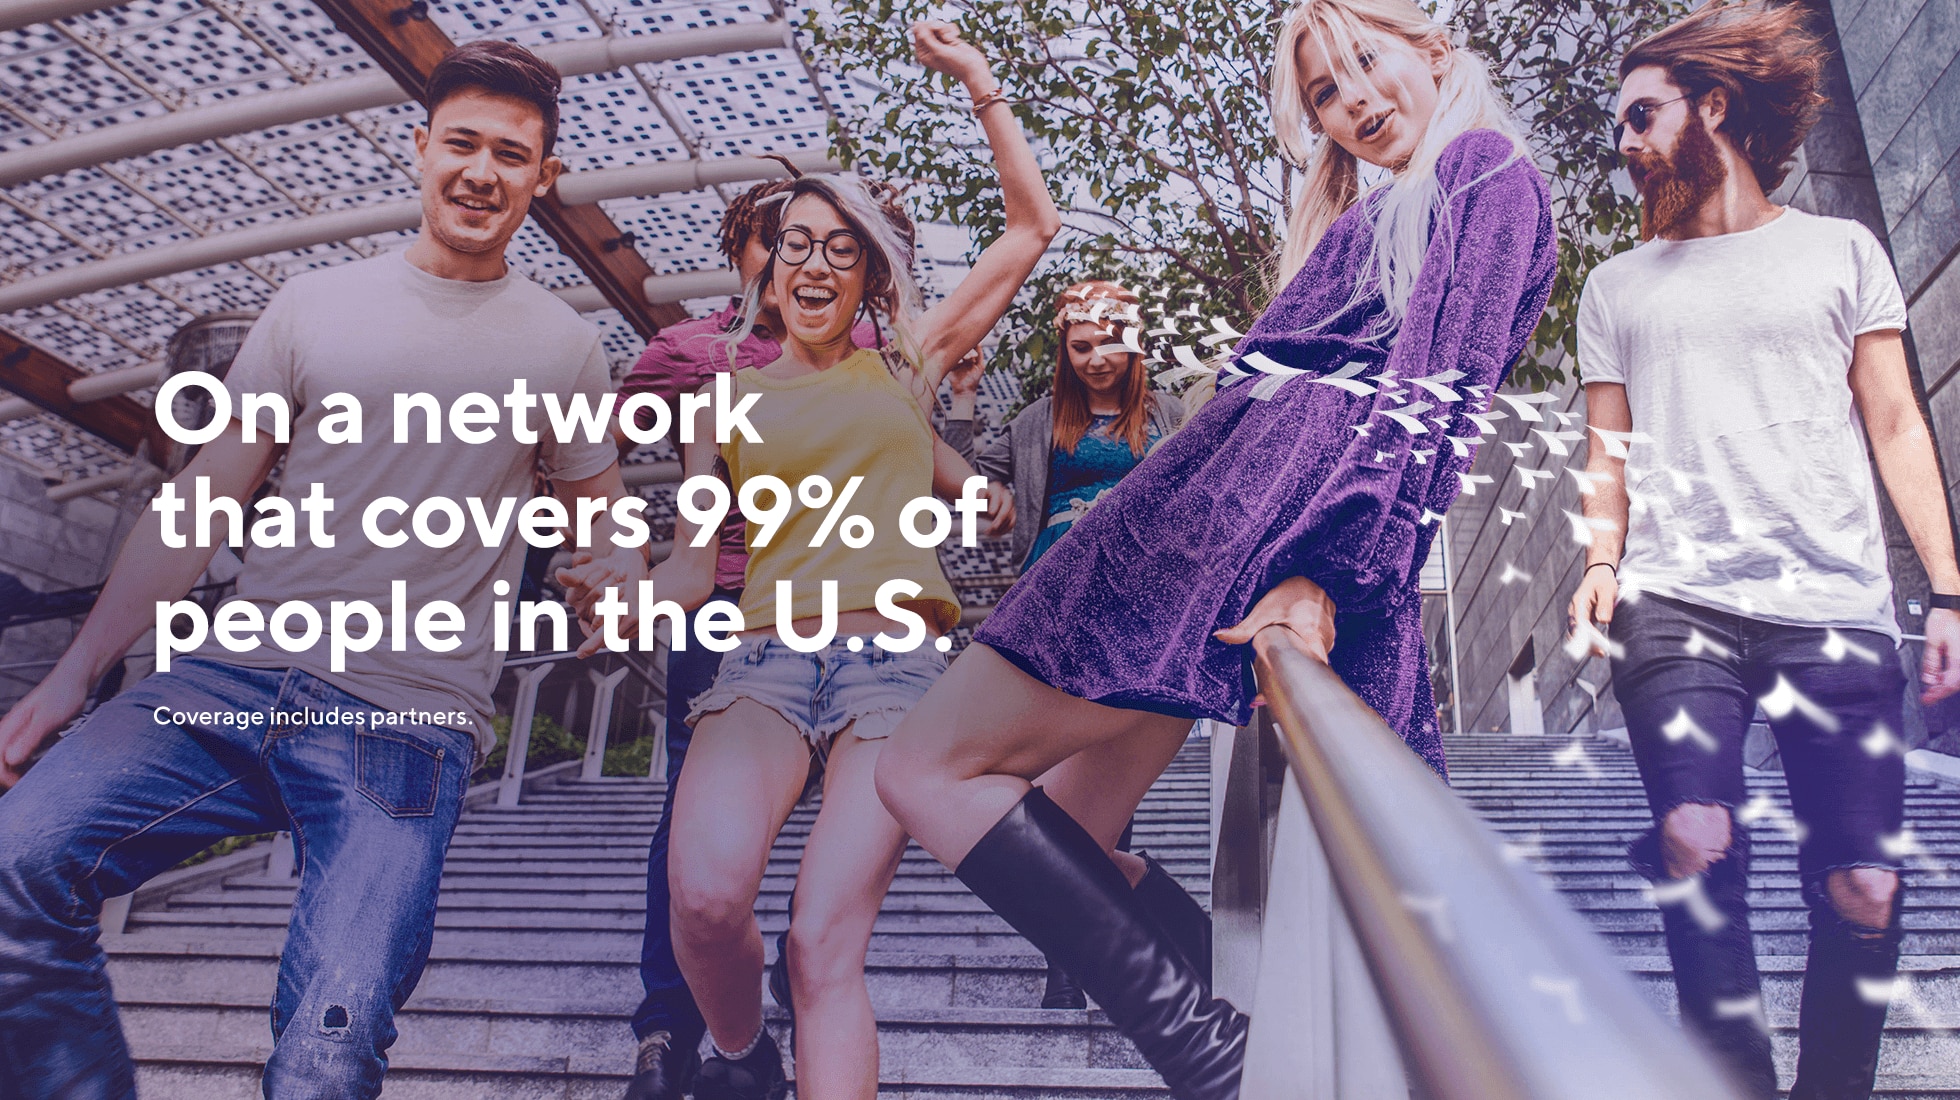 On a network that covers 99% of people in the U.S.